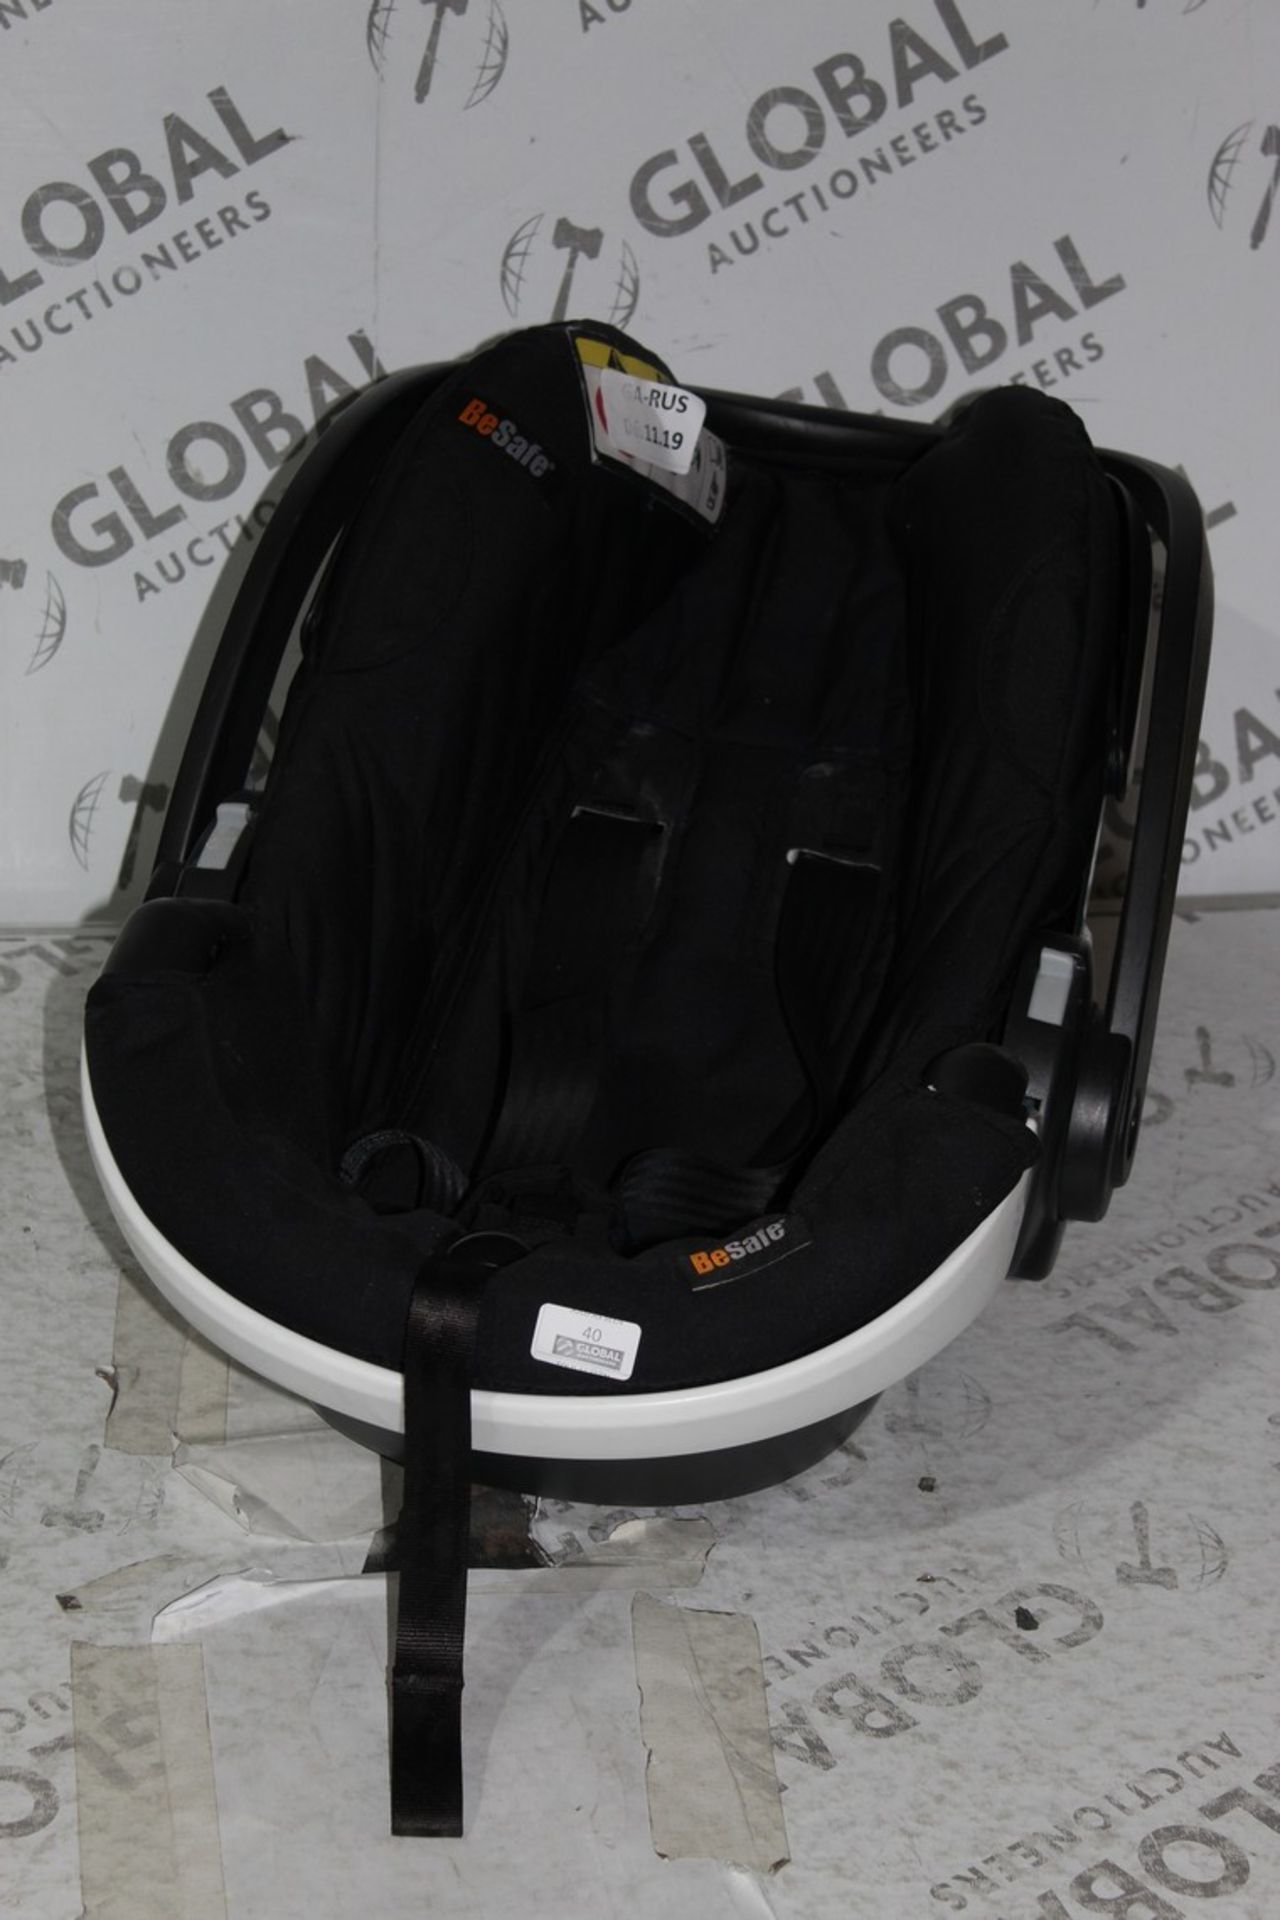 BeSafe Newborn Children's In Car Safety Seat RRP £140.00 (Public Viewing and Appraisals Available)